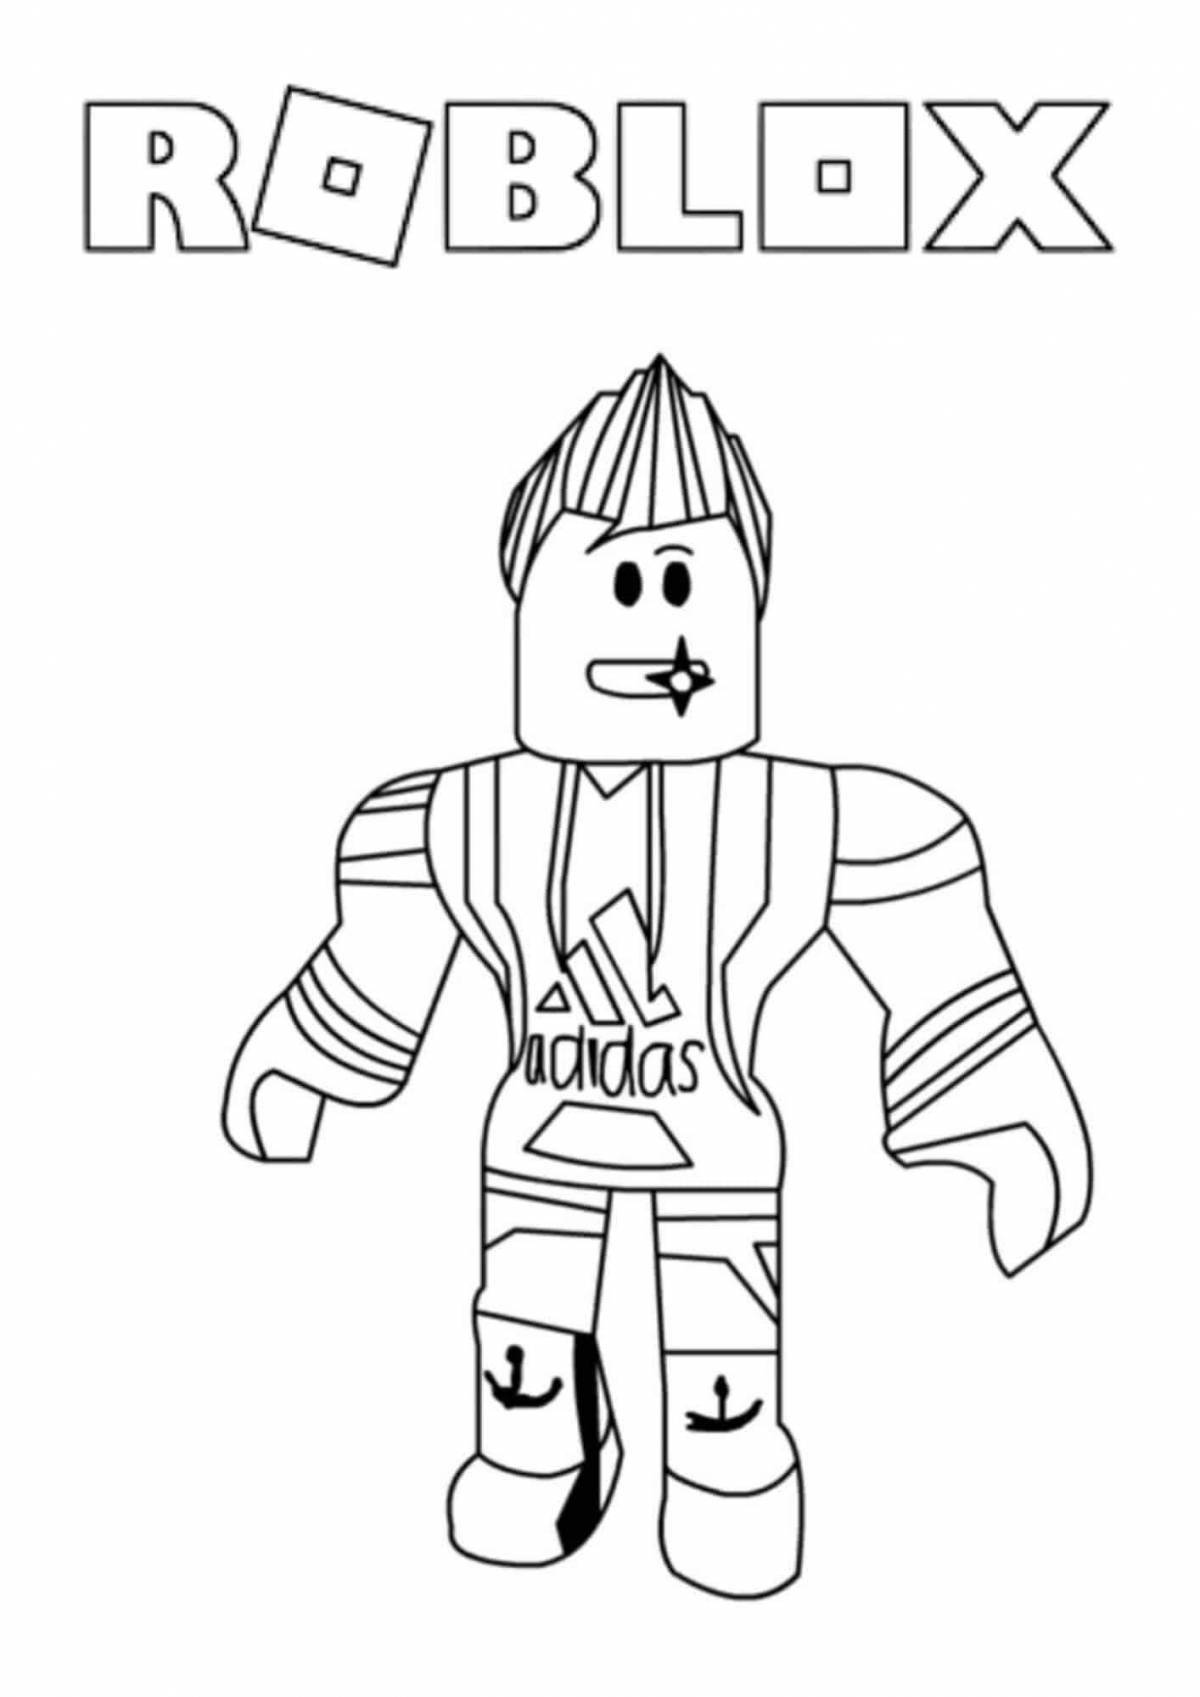 Roblox adorable characters coloring page